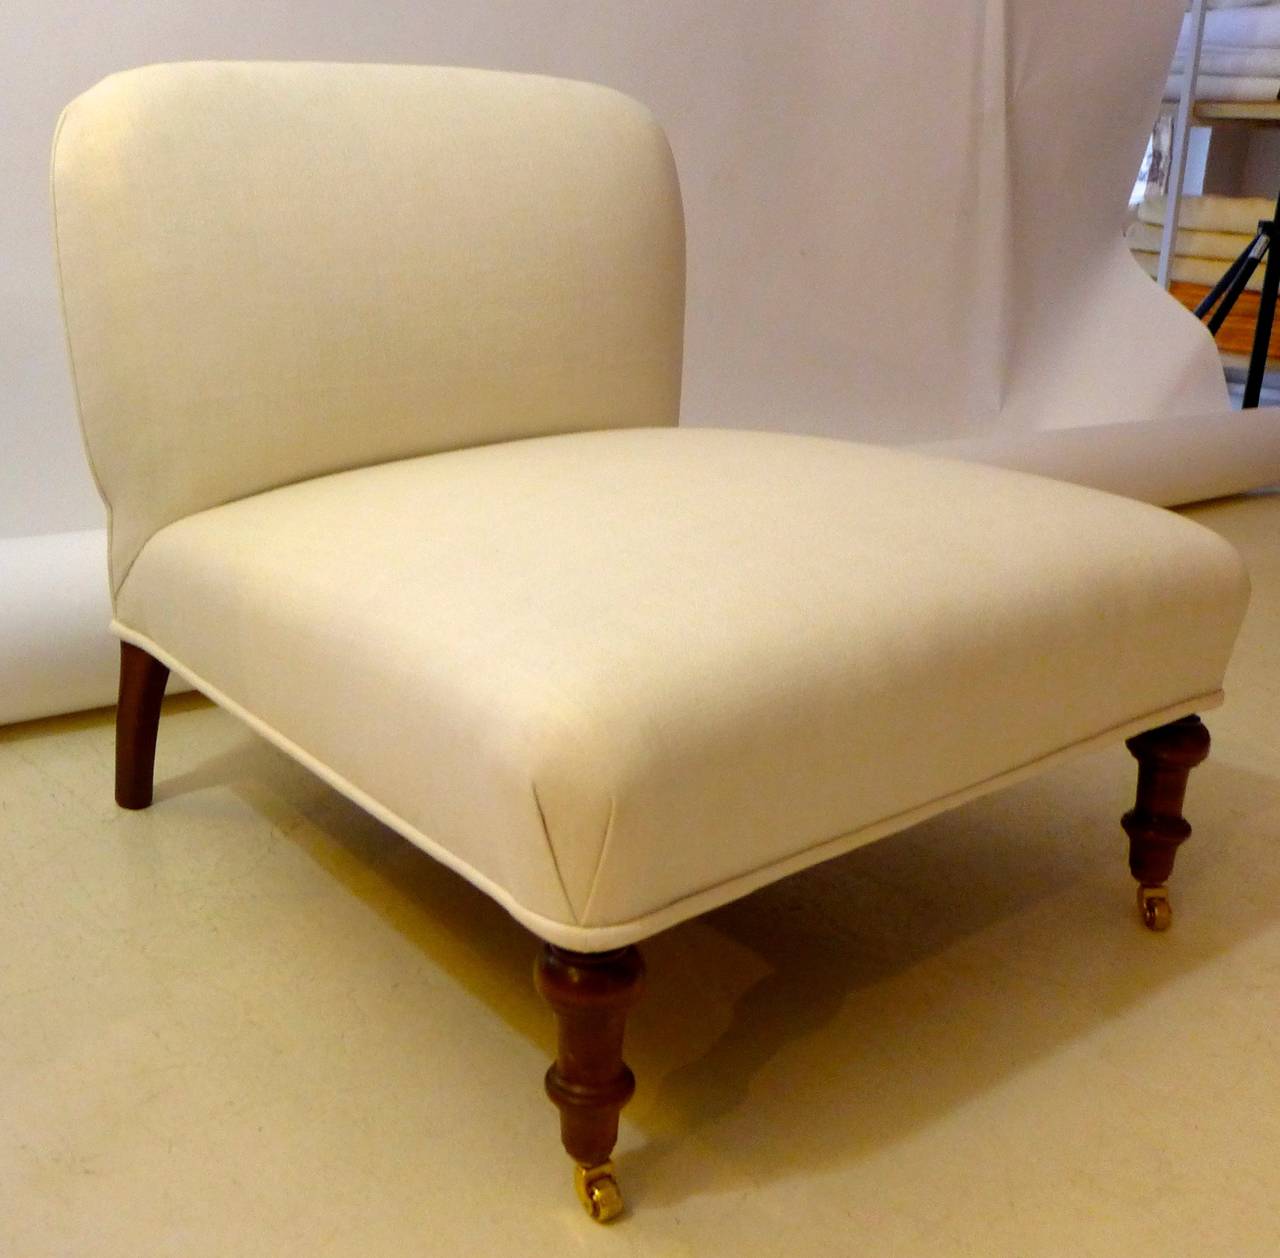 A French slipper chair in Napoleon III Style with turned wood legs on wheels in front. This chair is restored in the traditional way with copper springs and horsehair and upholstered with an off- white bleached hemp.